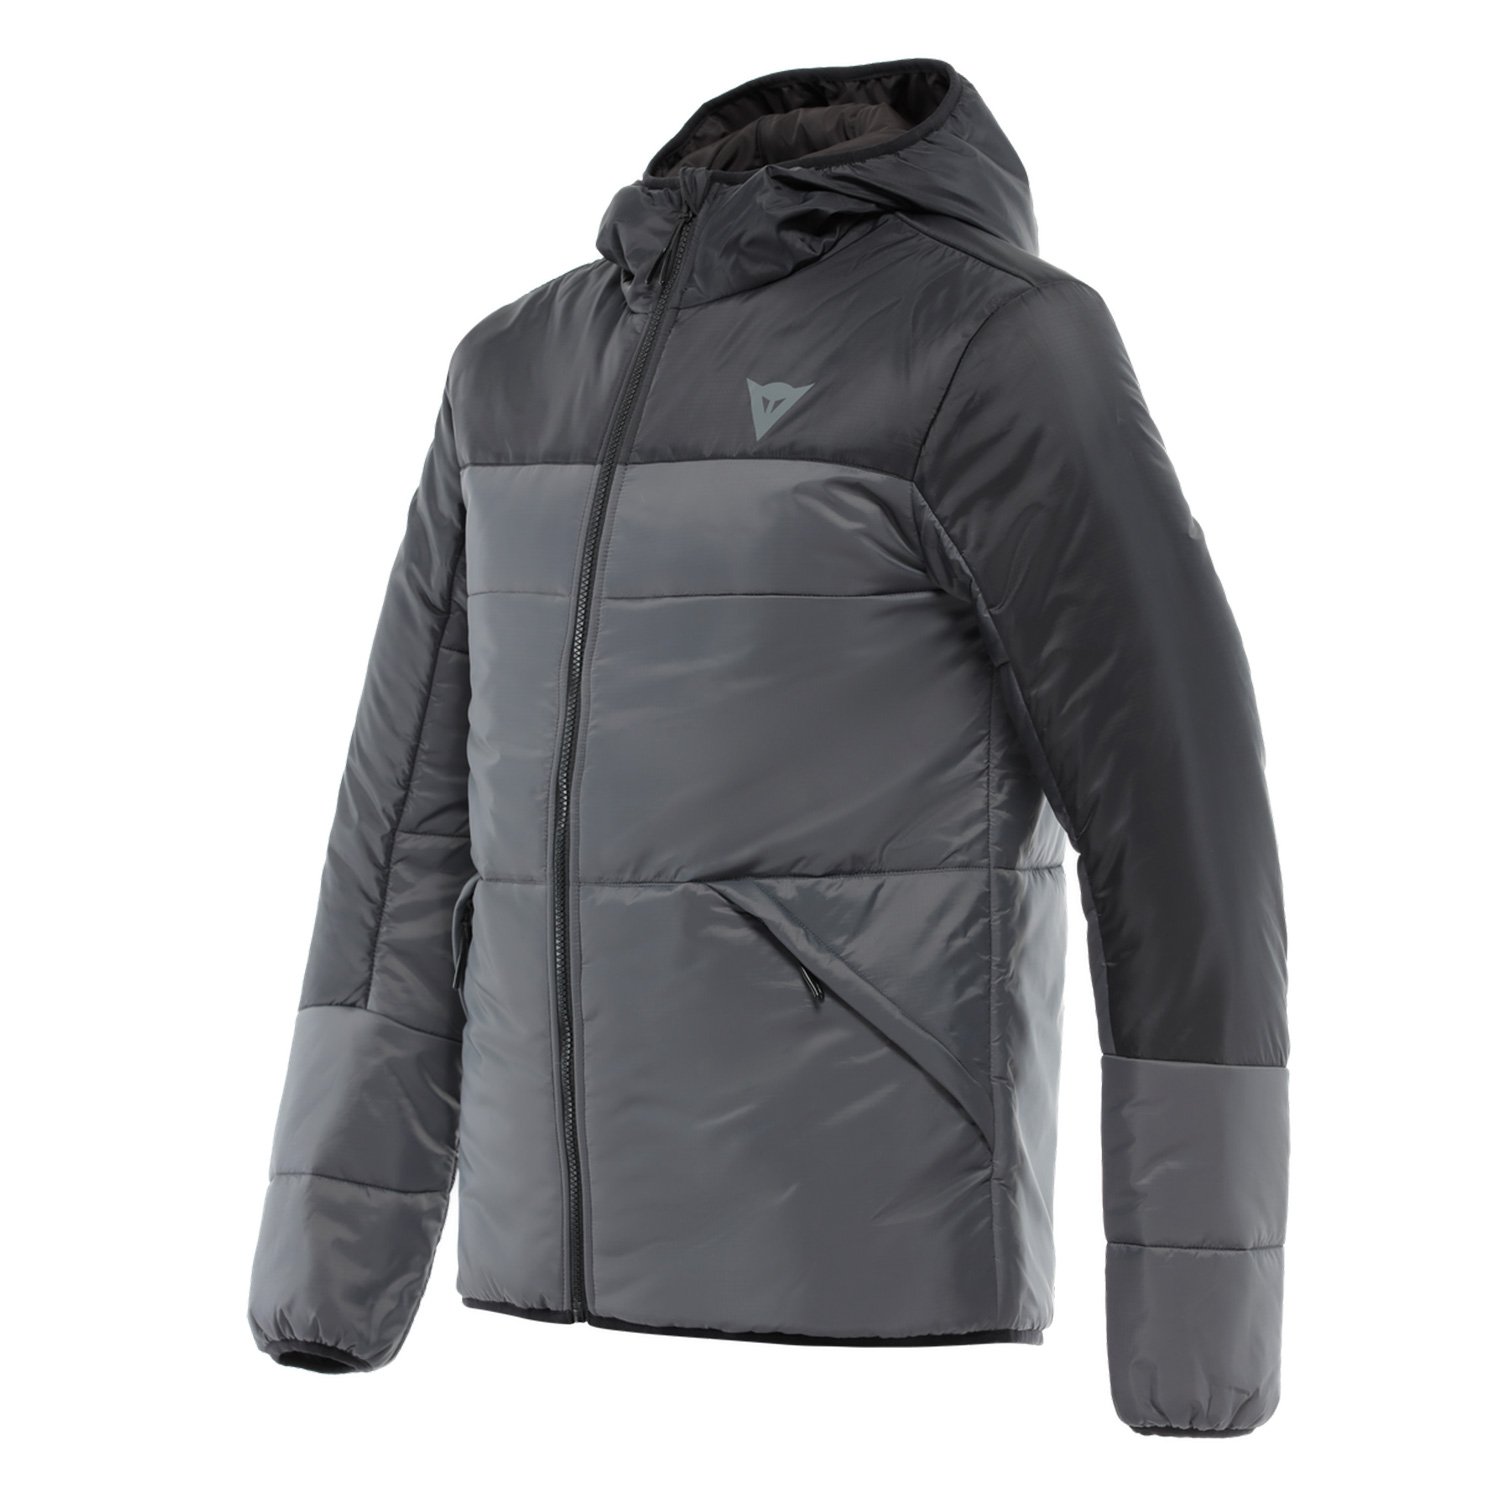 Image of Dainese After Ride Insulated Jacket Anthracite Size M ID 8051019657572